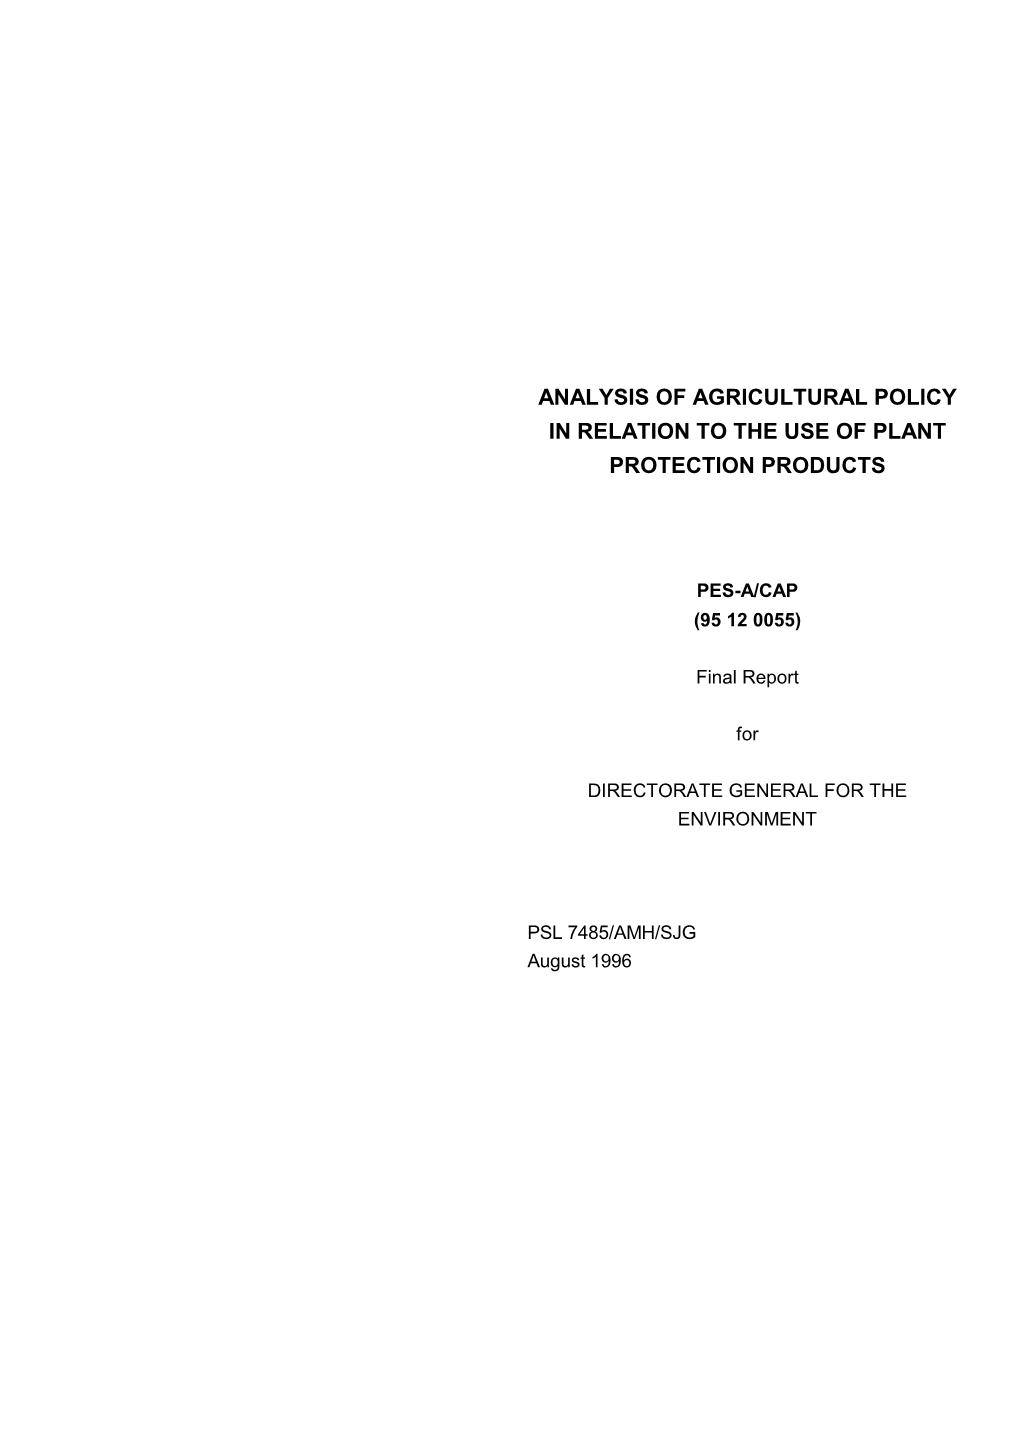 Analysis of Agricultural Policy in Relation to the Use of Plant Protection Products